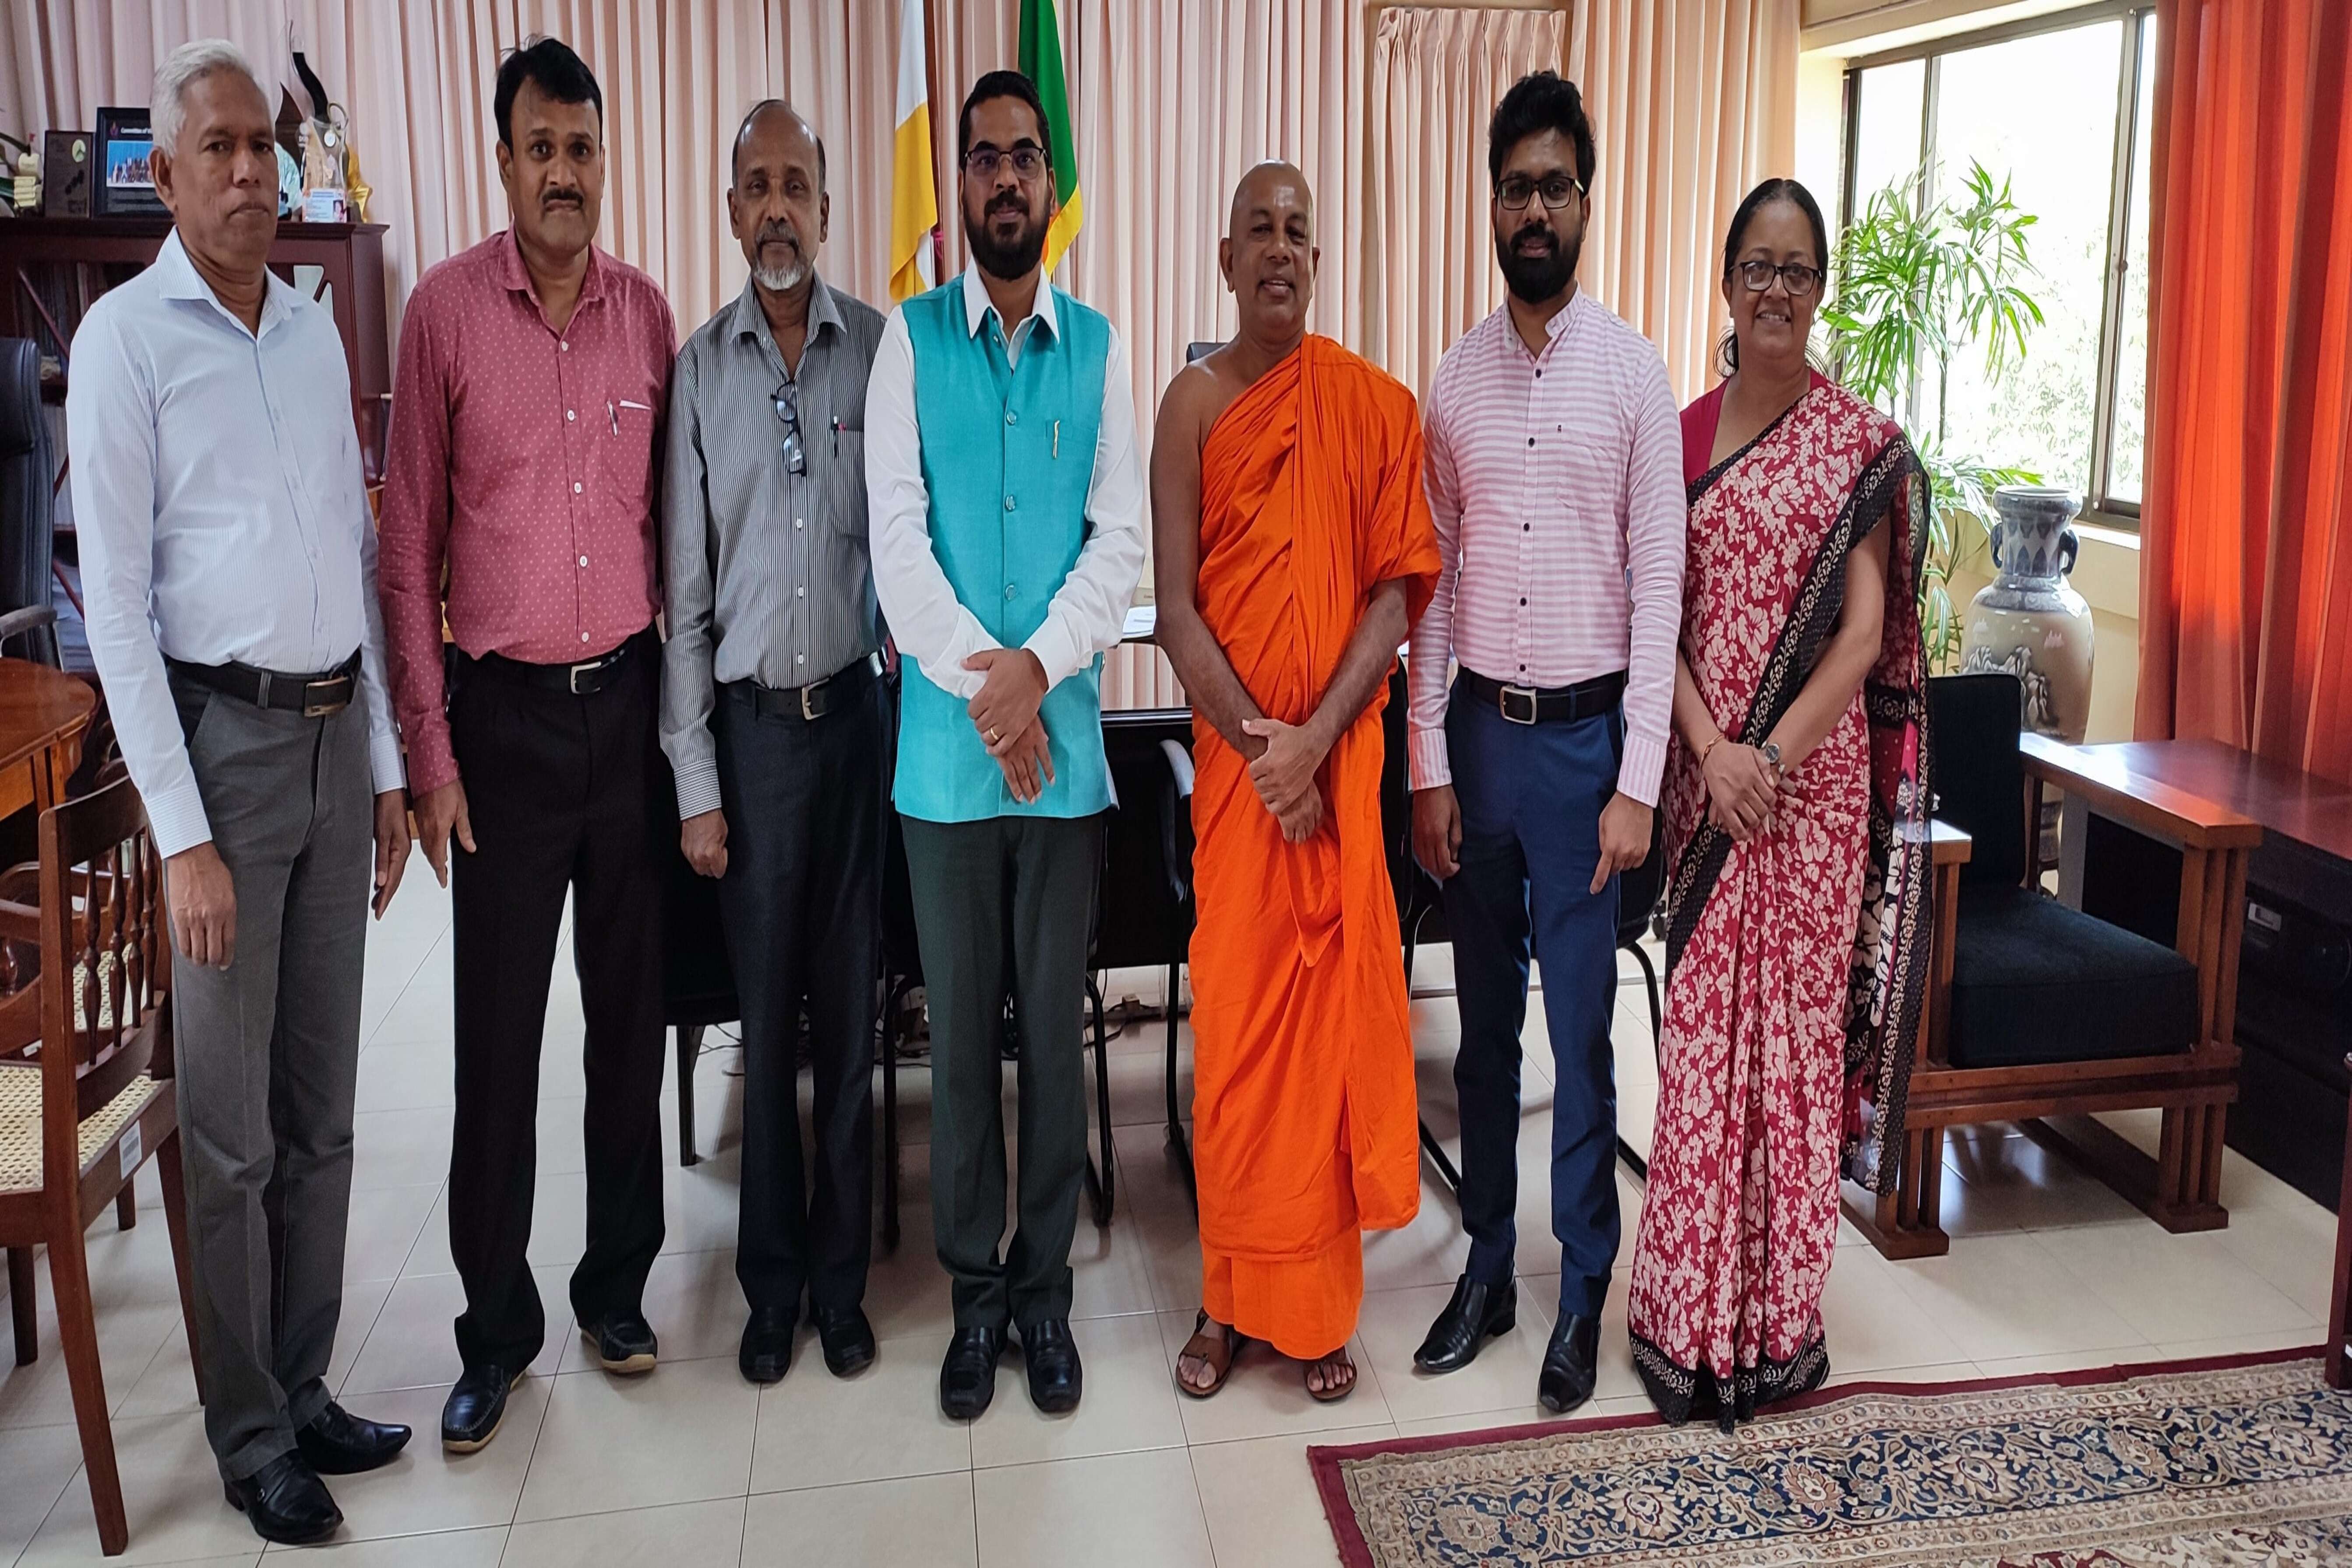 Discussion about collaborative activities between Swami Vivekananda Cultural Centre, Colombo and the Faculty of Humanities, on 04 April 2023